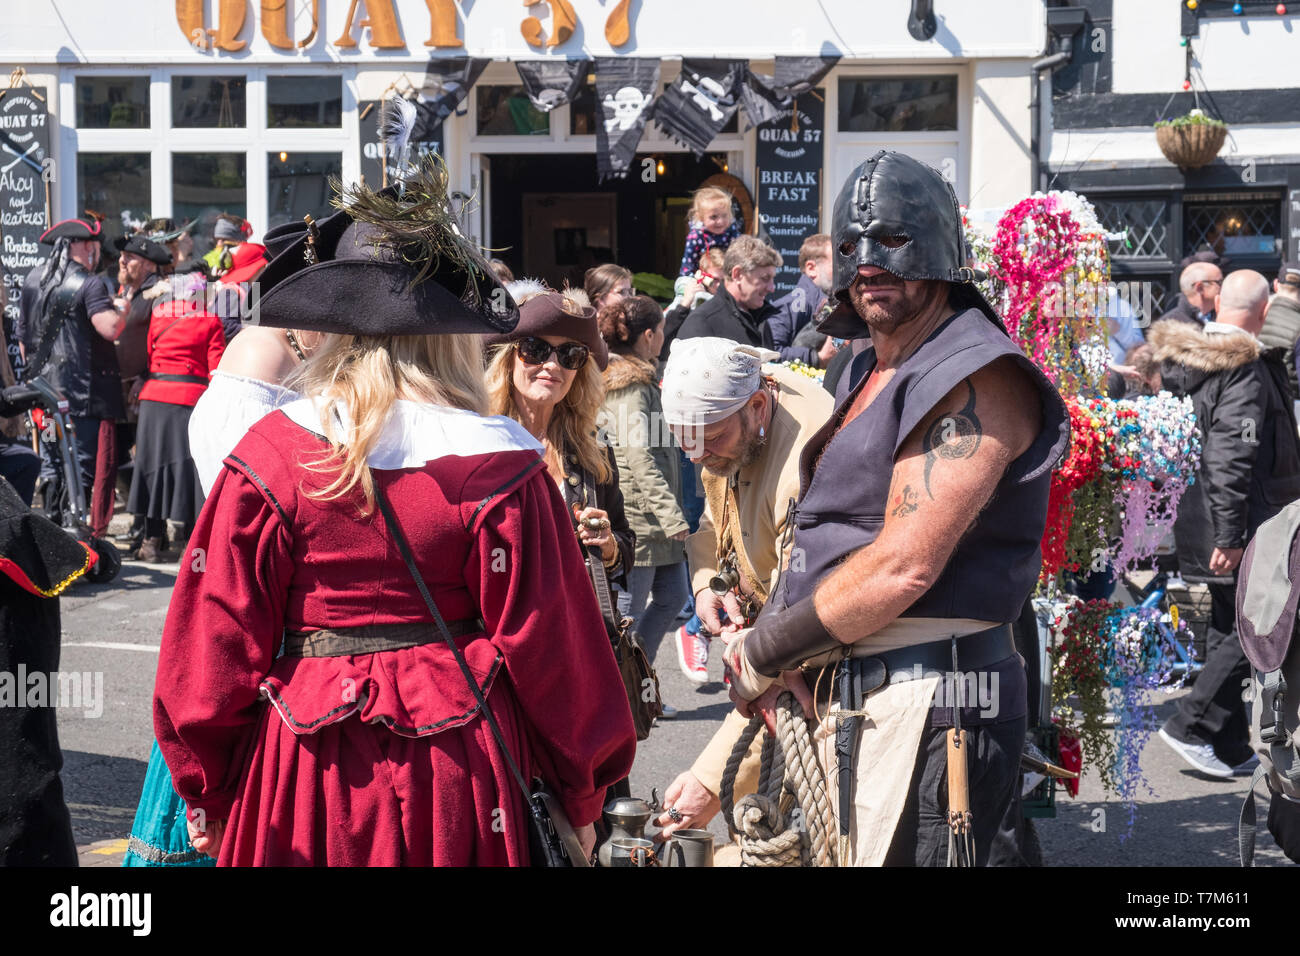 https://c8.alamy.com/comp/T7M611/locals-and-visitors-dress-up-as-pirates-for-the-brixham-pirate-festival-in-the-devon-fishing-town-T7M611.jpg